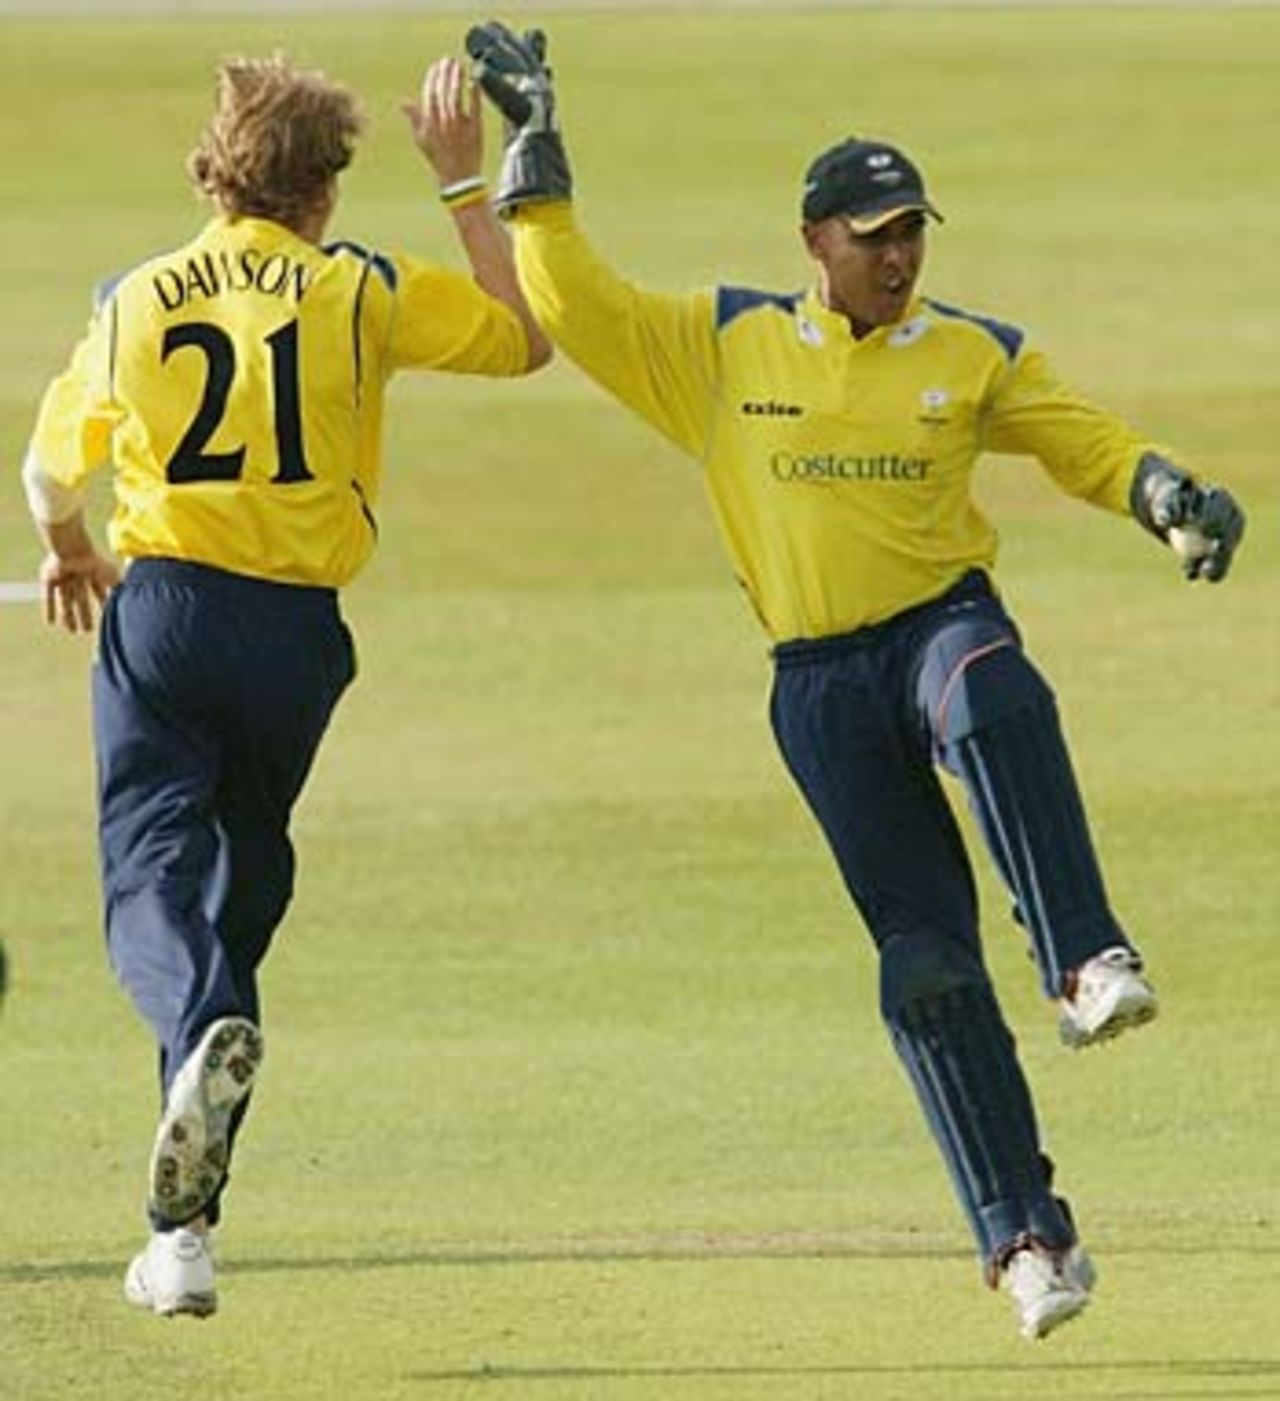 Ismail Dawood and Richard Dawson celebrate the run out of Phil Mustard, Yorkshire v Durham, Headingley, June 30, 2005